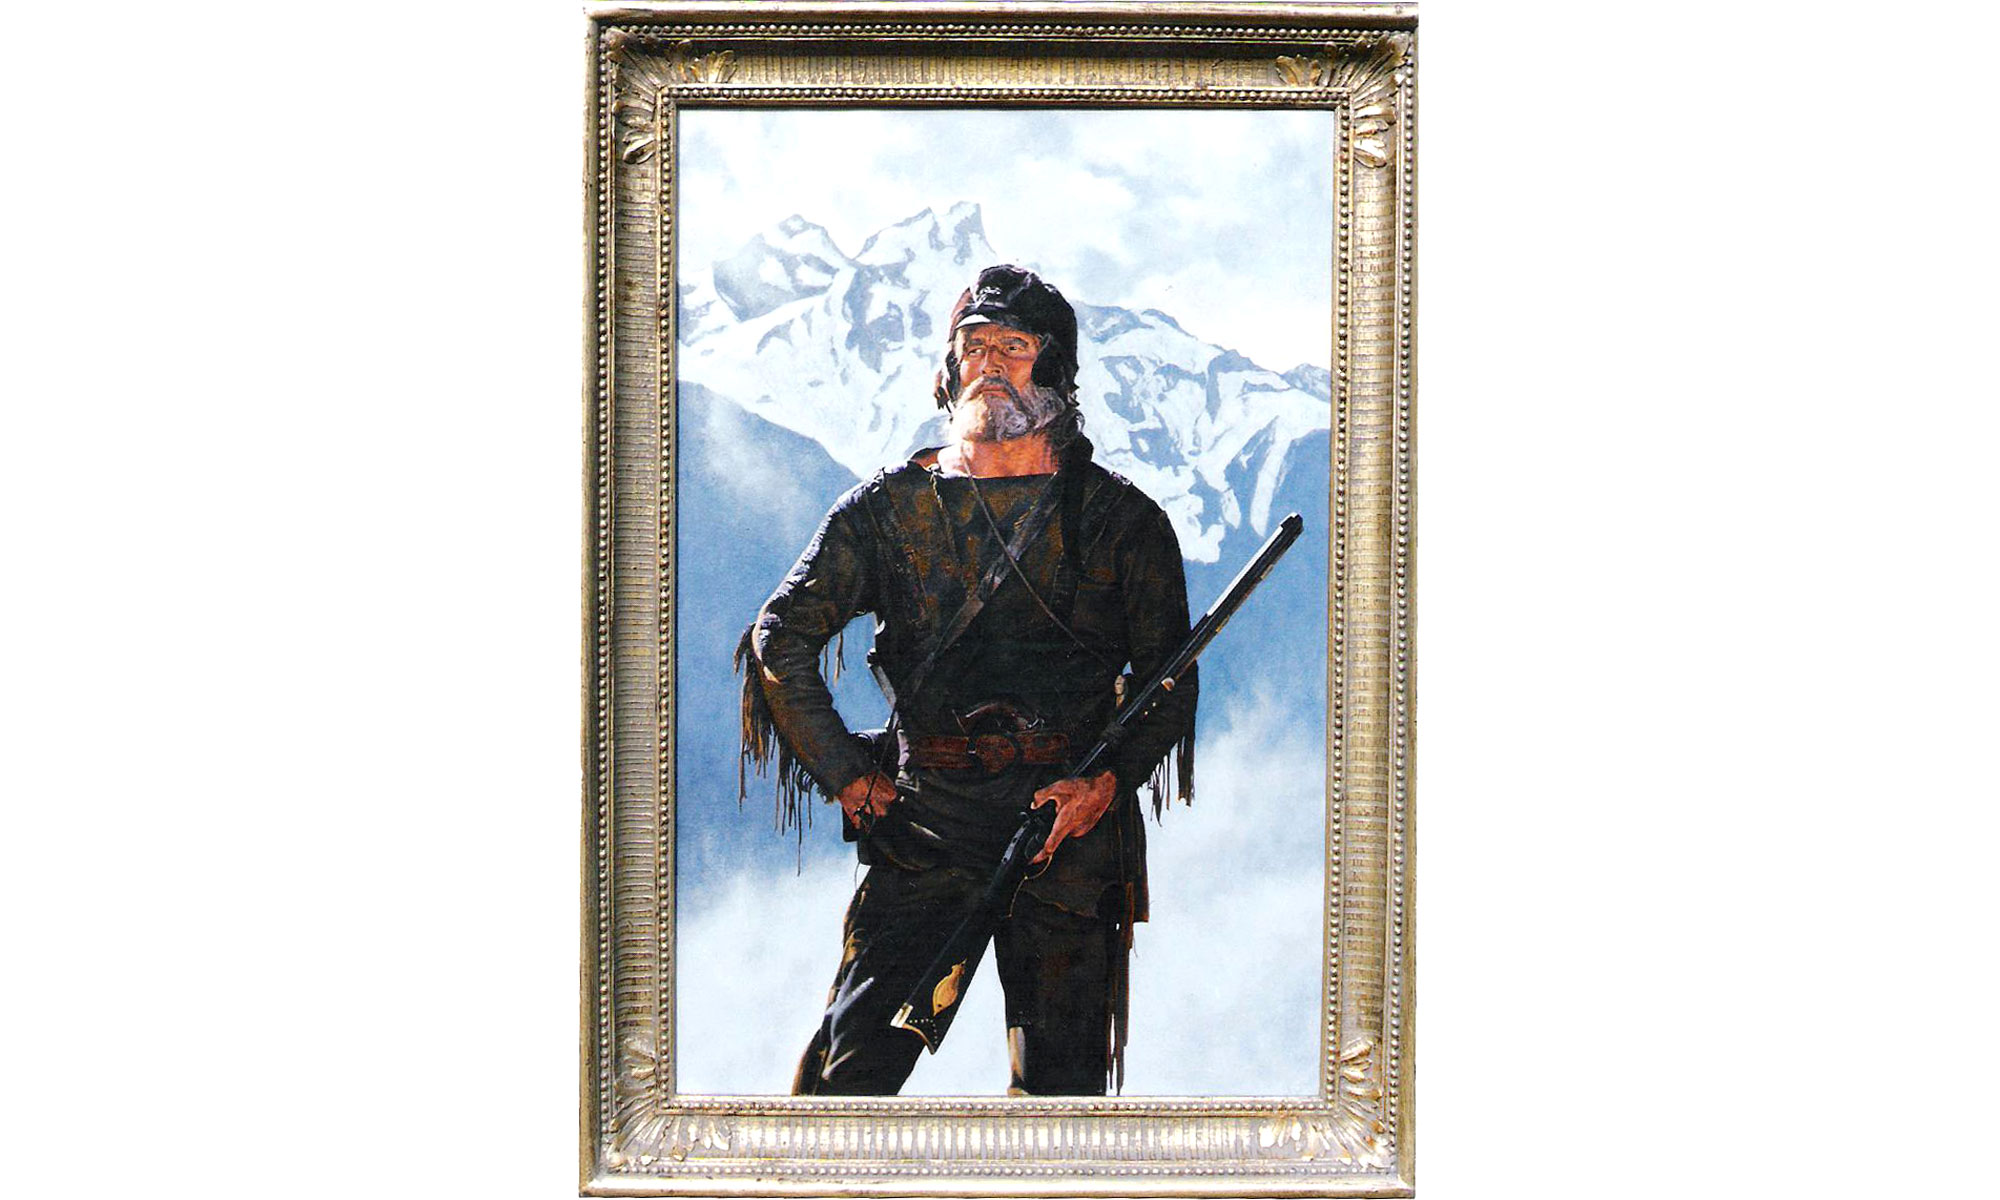 Charlton Heston as The Mountain Man Portrait Painting by Terence J Gilbert Oil on Canvas